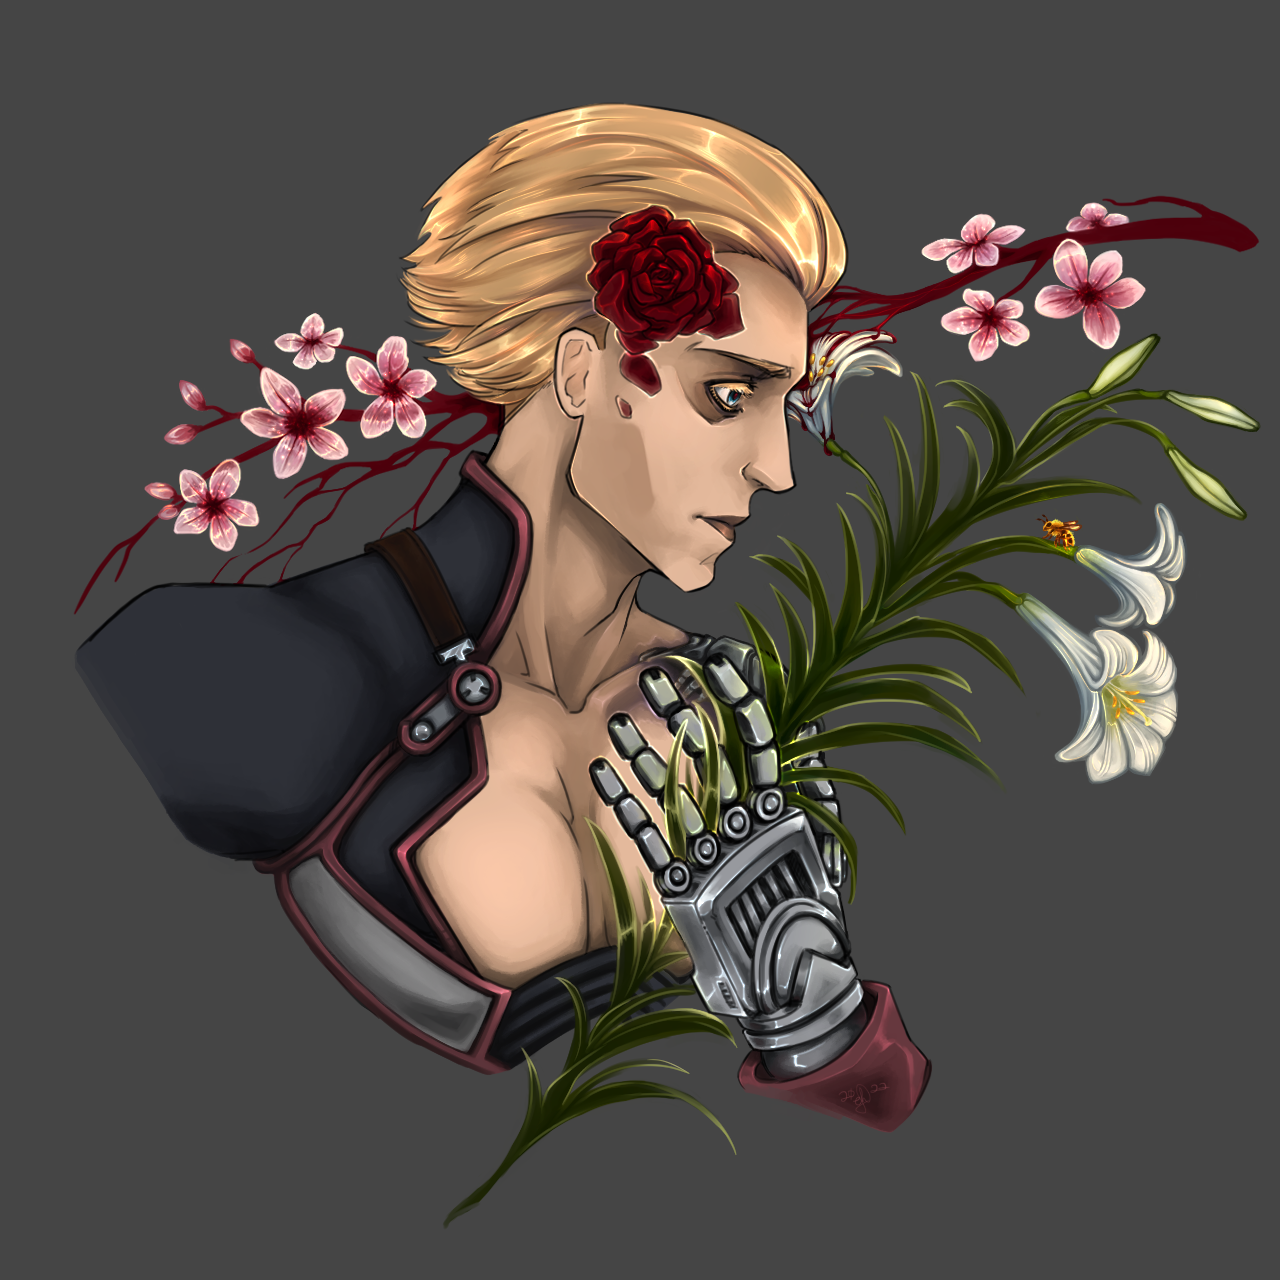 Digital drawing of Ziggurat 8 from Xenosaga, from the chest and shoulders up, in profile facing to his left. There is a dark red rose flower resting on the side of his head, and he is holding a stem of white lilies in his left hand. Behind his head is a red tree branch resembling a blood vessel, with several peach blossoms. Blood from the branch leaks down onto a lily flower close to his face. A bee is resting on another of the lily flowers.